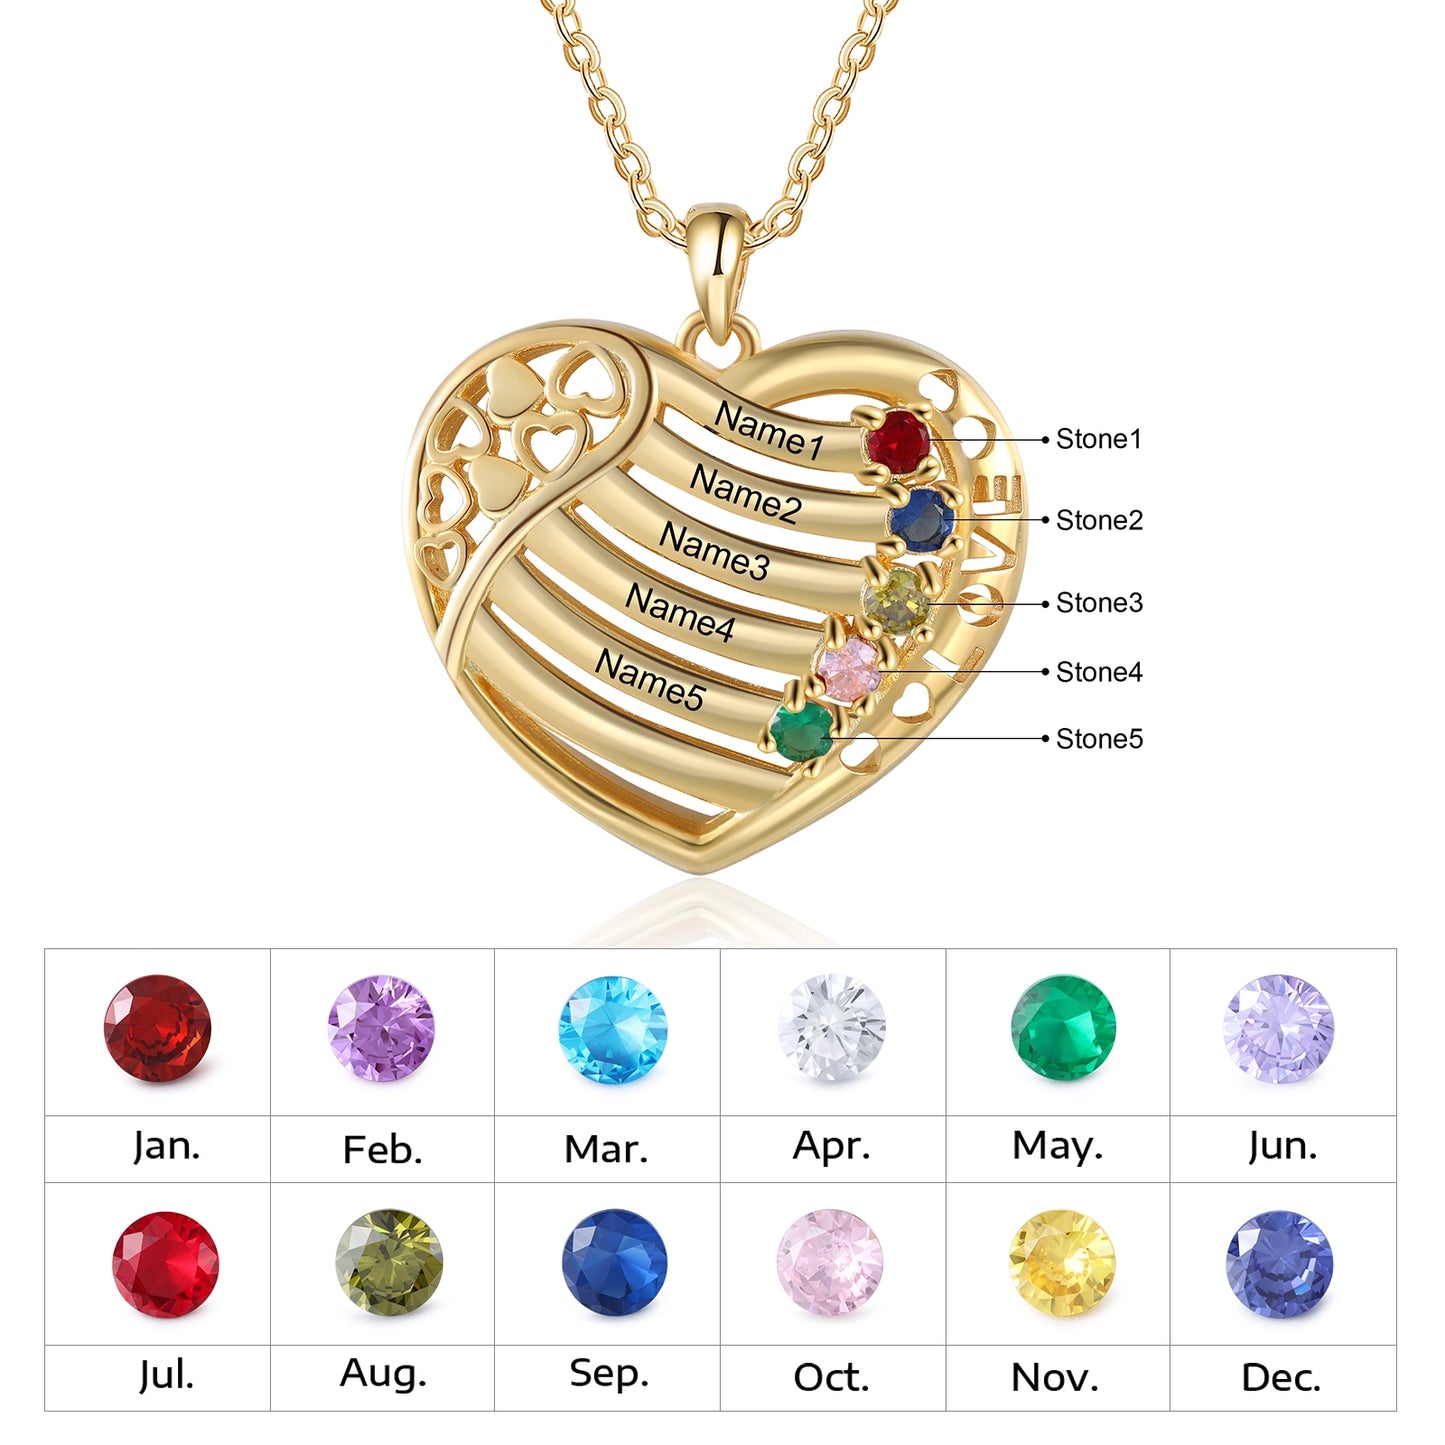 Customized Birthstone Heart Necklace - Personalized Family Jewelry